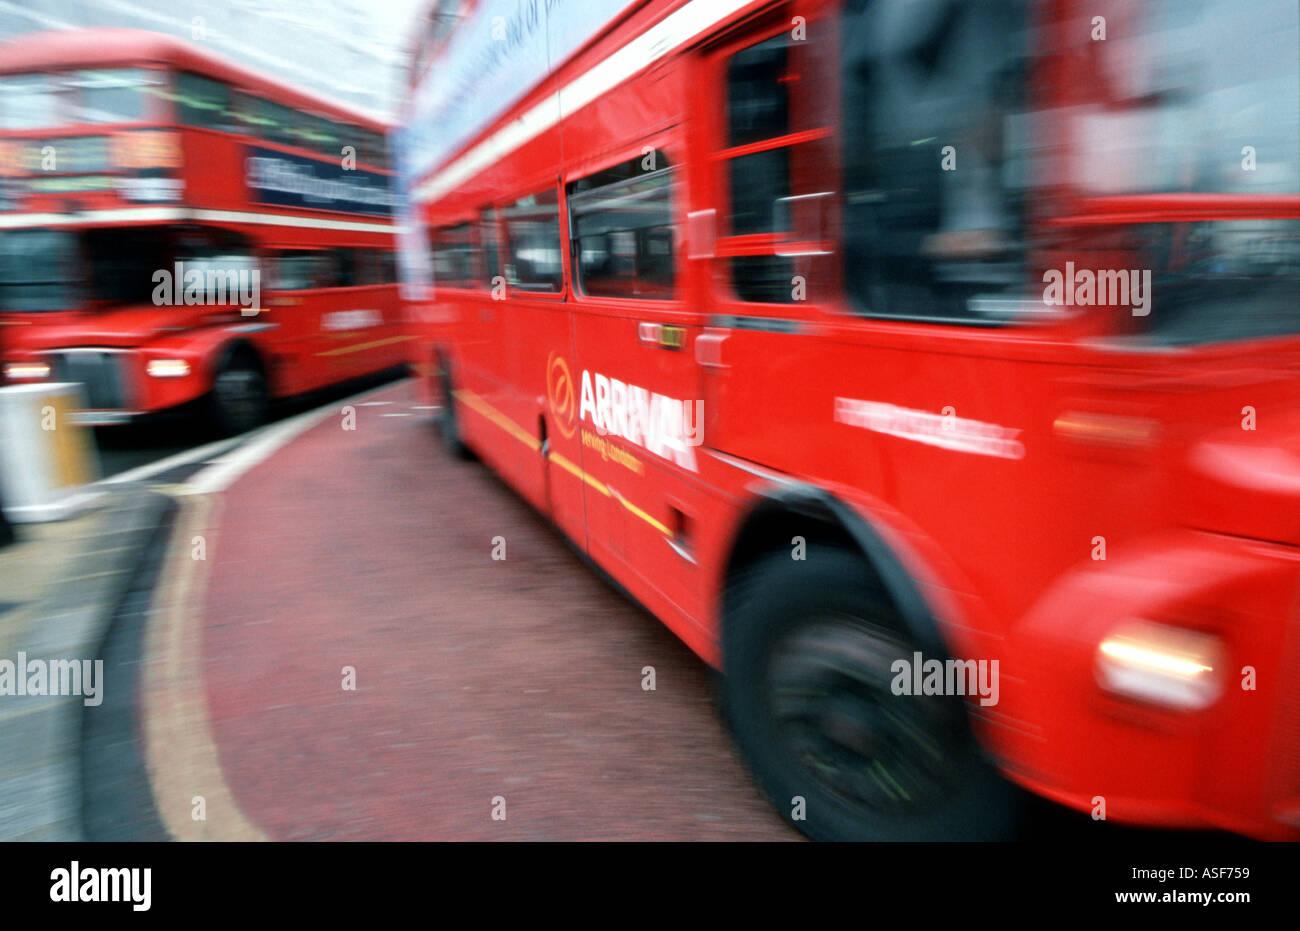 Red London buses Stock Photo